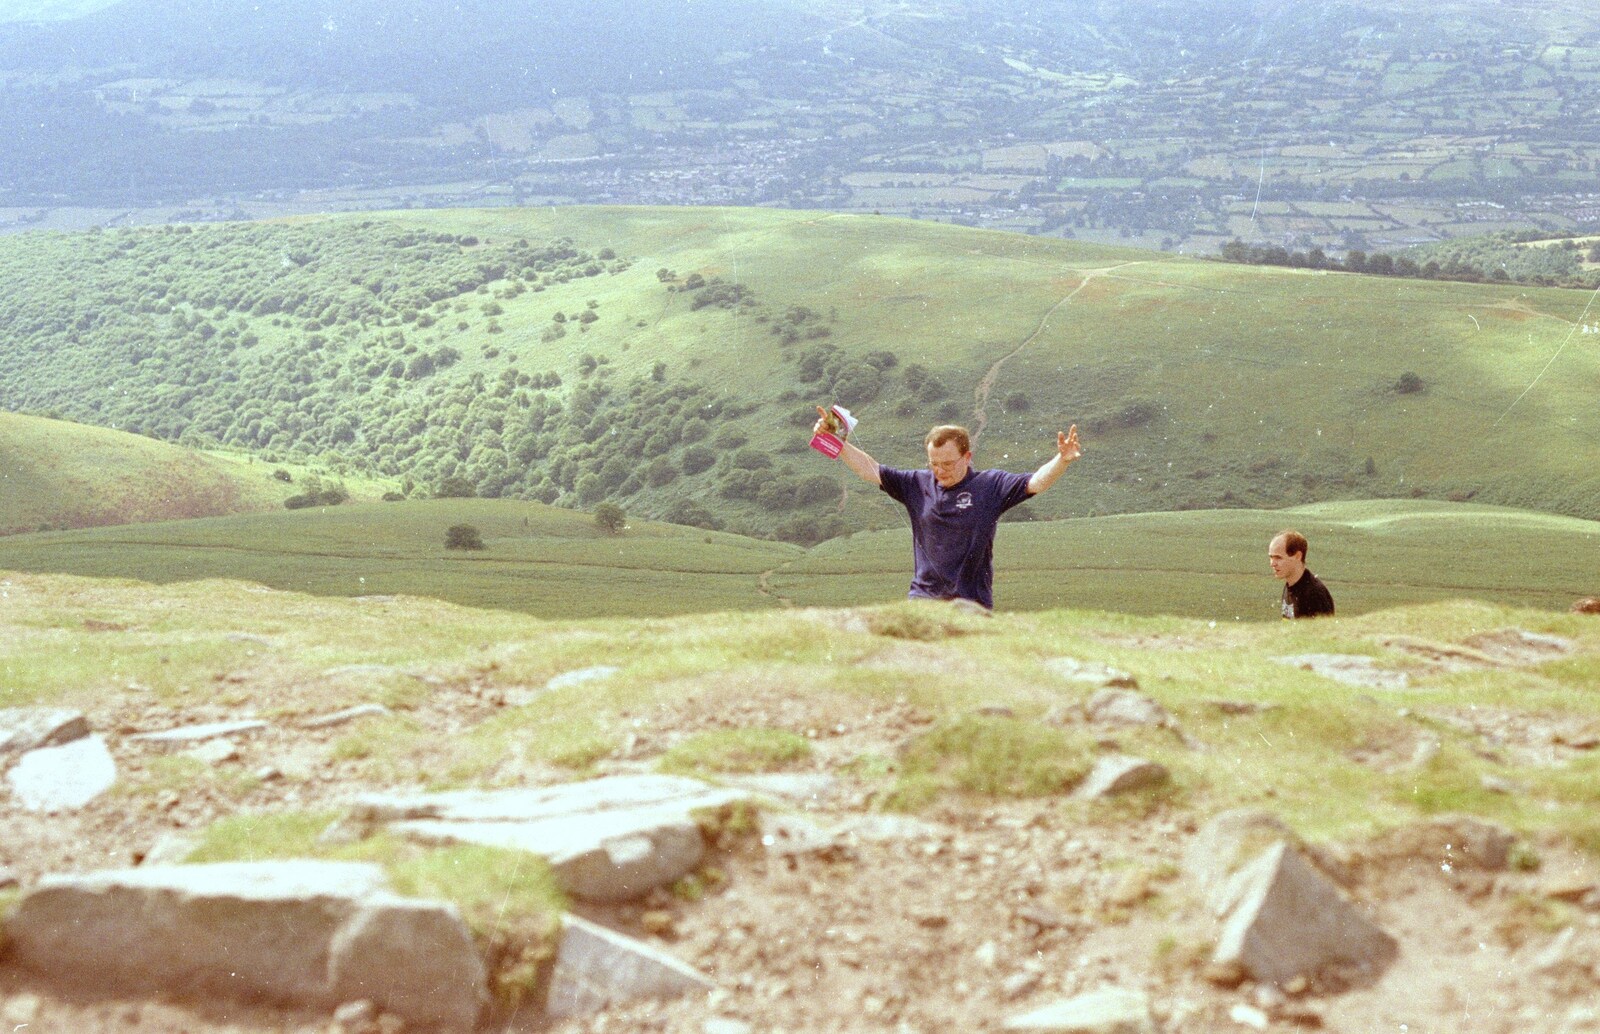 Hamish sticks his hands in the air from A Walk in the Brecon Beacons, Bannau Brycheiniog, Wales - 5th August 1990